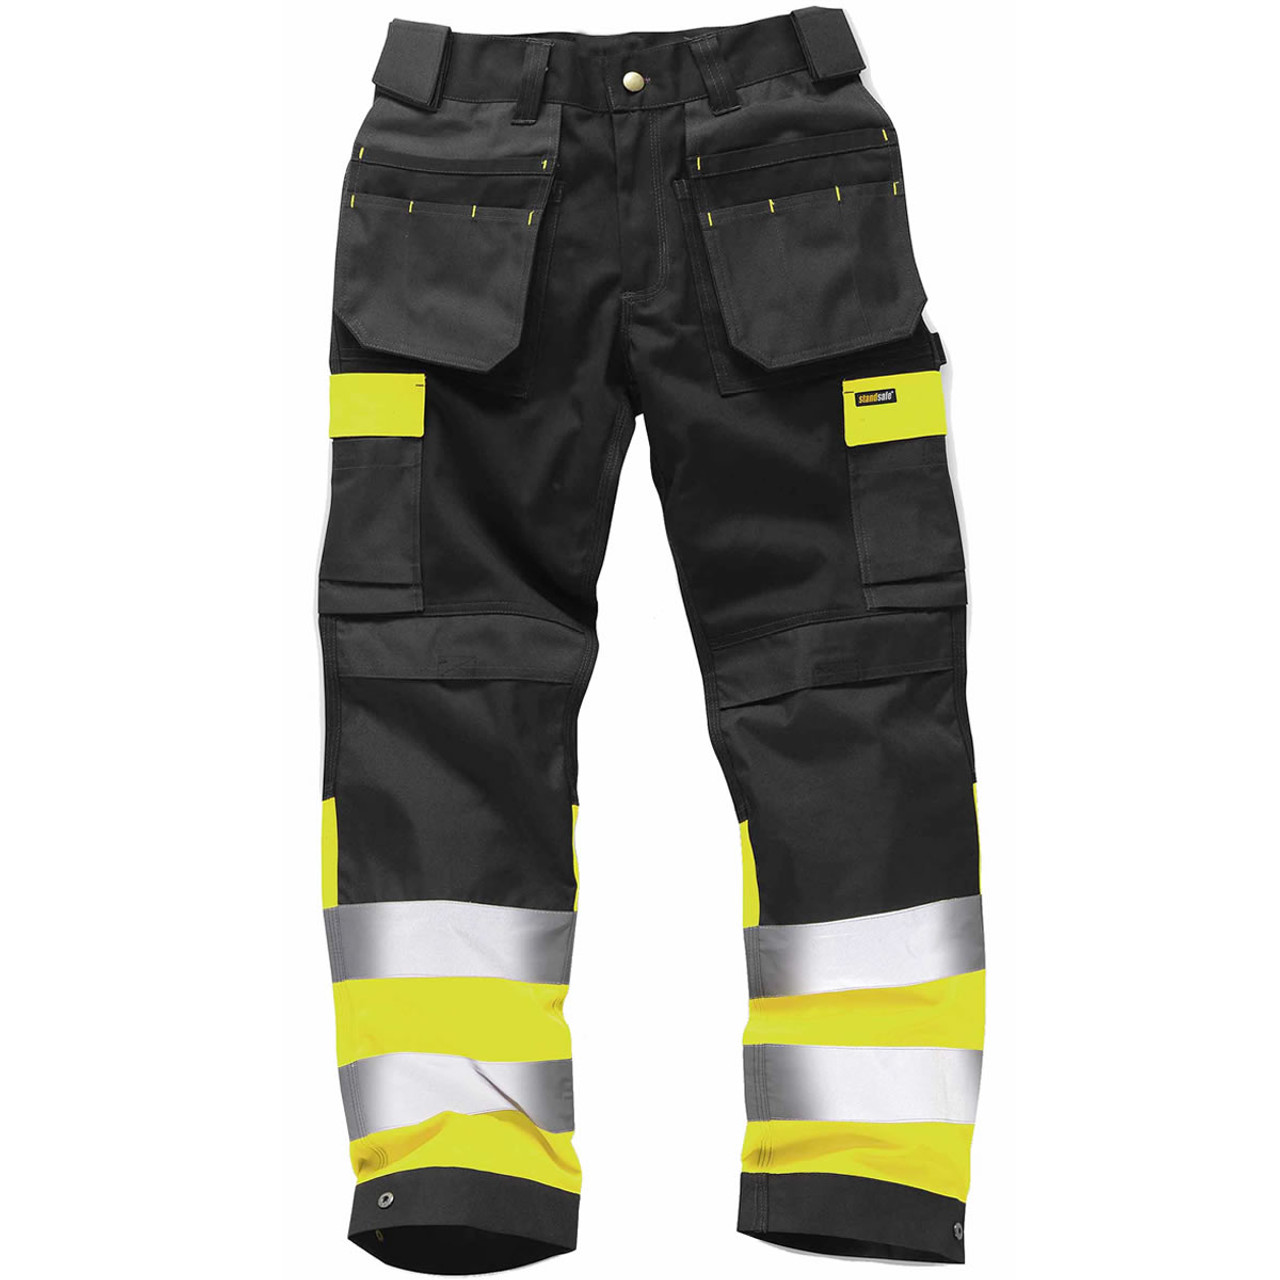 Mascot Workwear 19879 Accelerate Safe Trousers with kneepad pockets Black/Hi -Vis Yellow Waist: 35.5